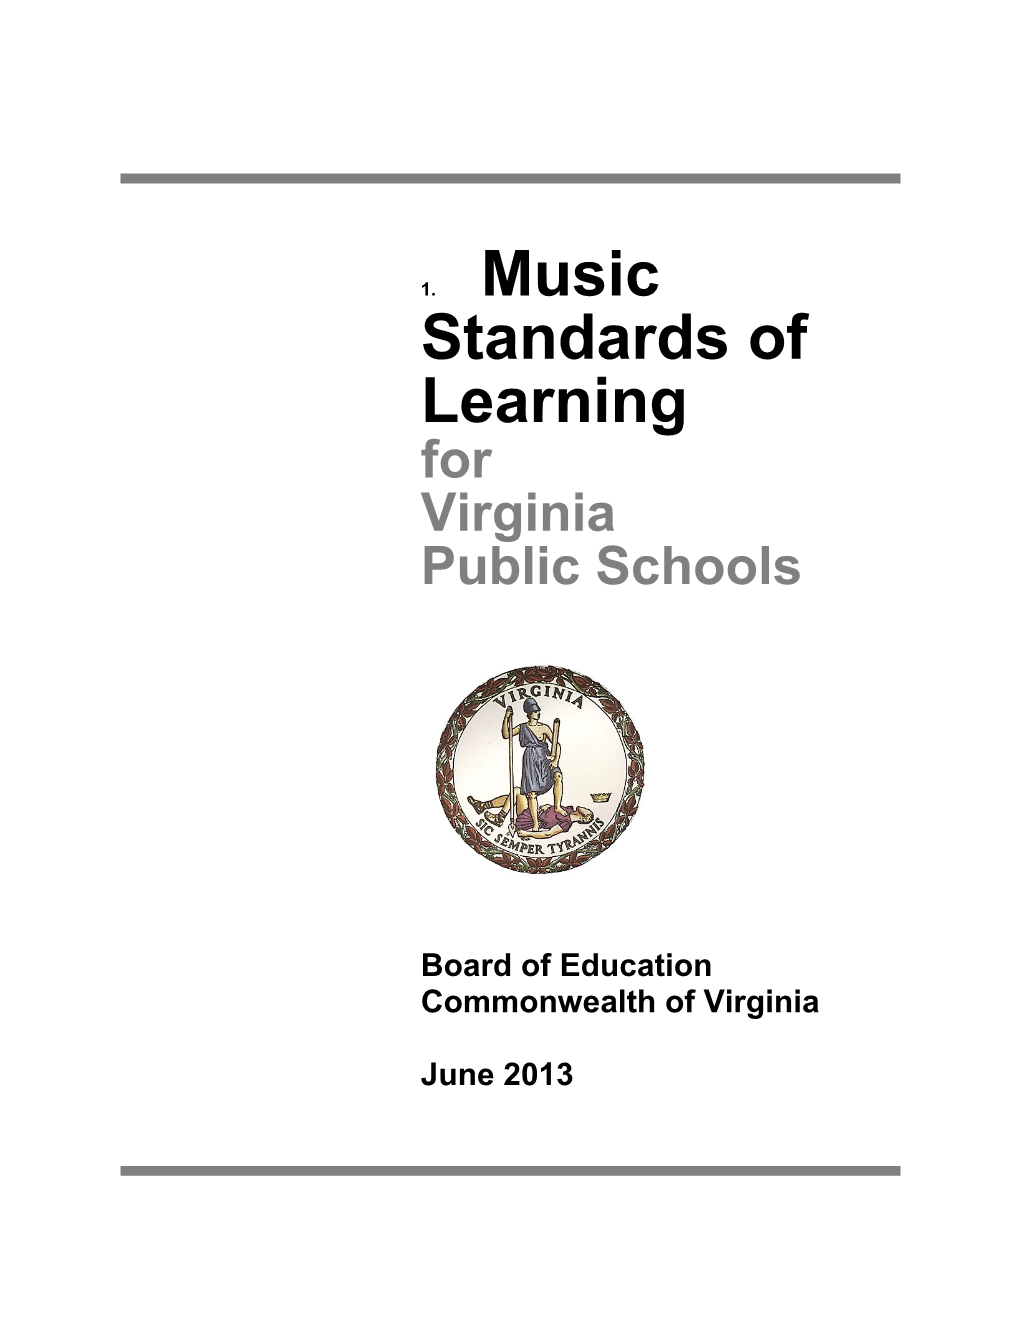 Music Standards of Learning